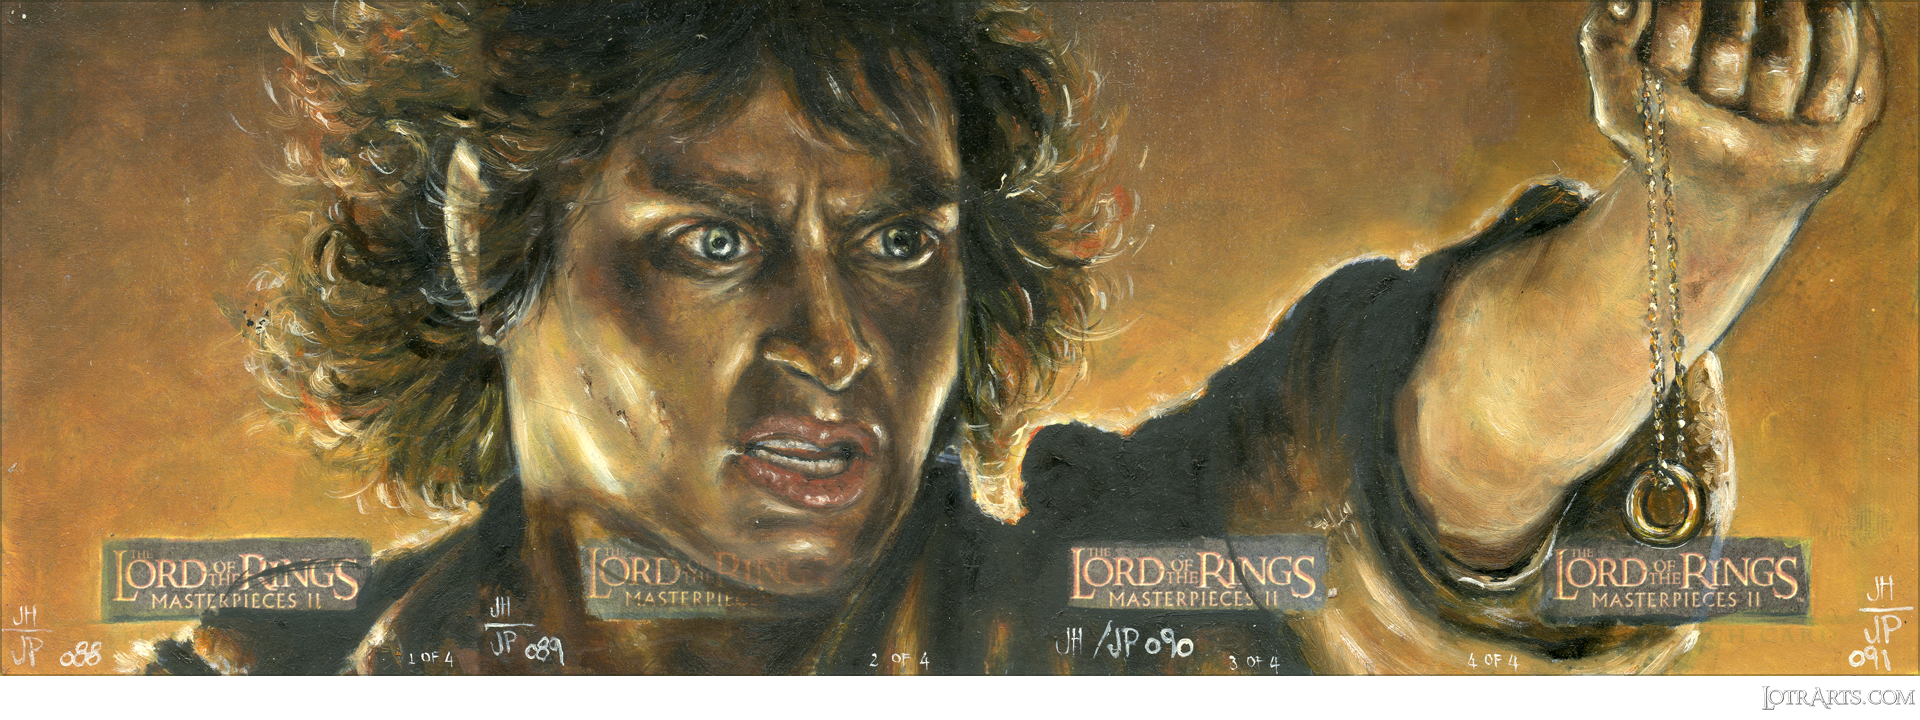 Frodo holding out Ring, four-card panel, by Potratz and Hai<span class="ngViews">11 views</span>